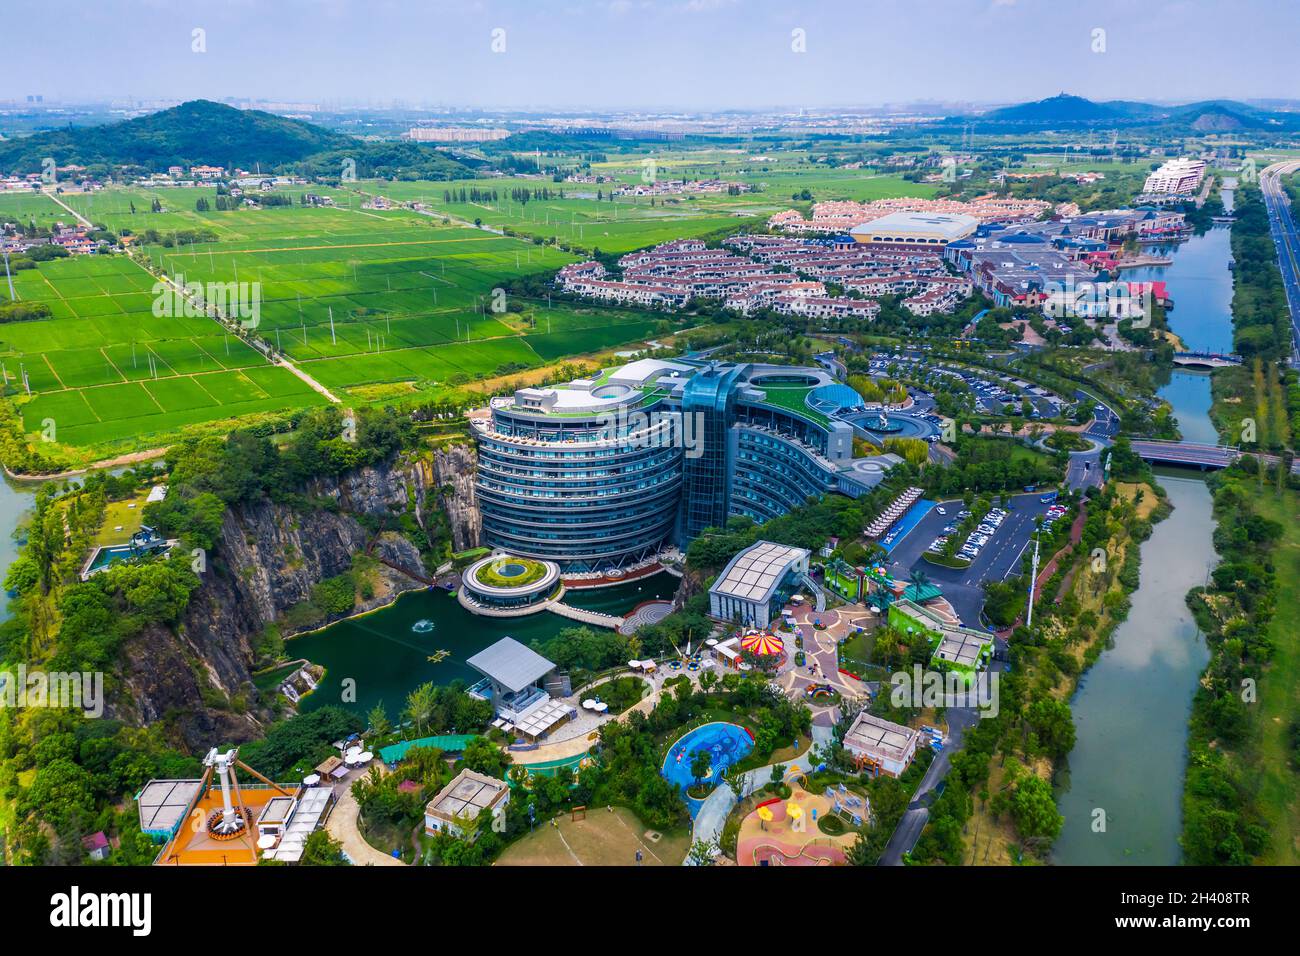 Shanghai,China - August 23,2020:Shimao Shenkeng Intercontinental Hotel in Shanghai Sheshan,the altitude is minus 88 meters.It is the world's first nat Stock Photo